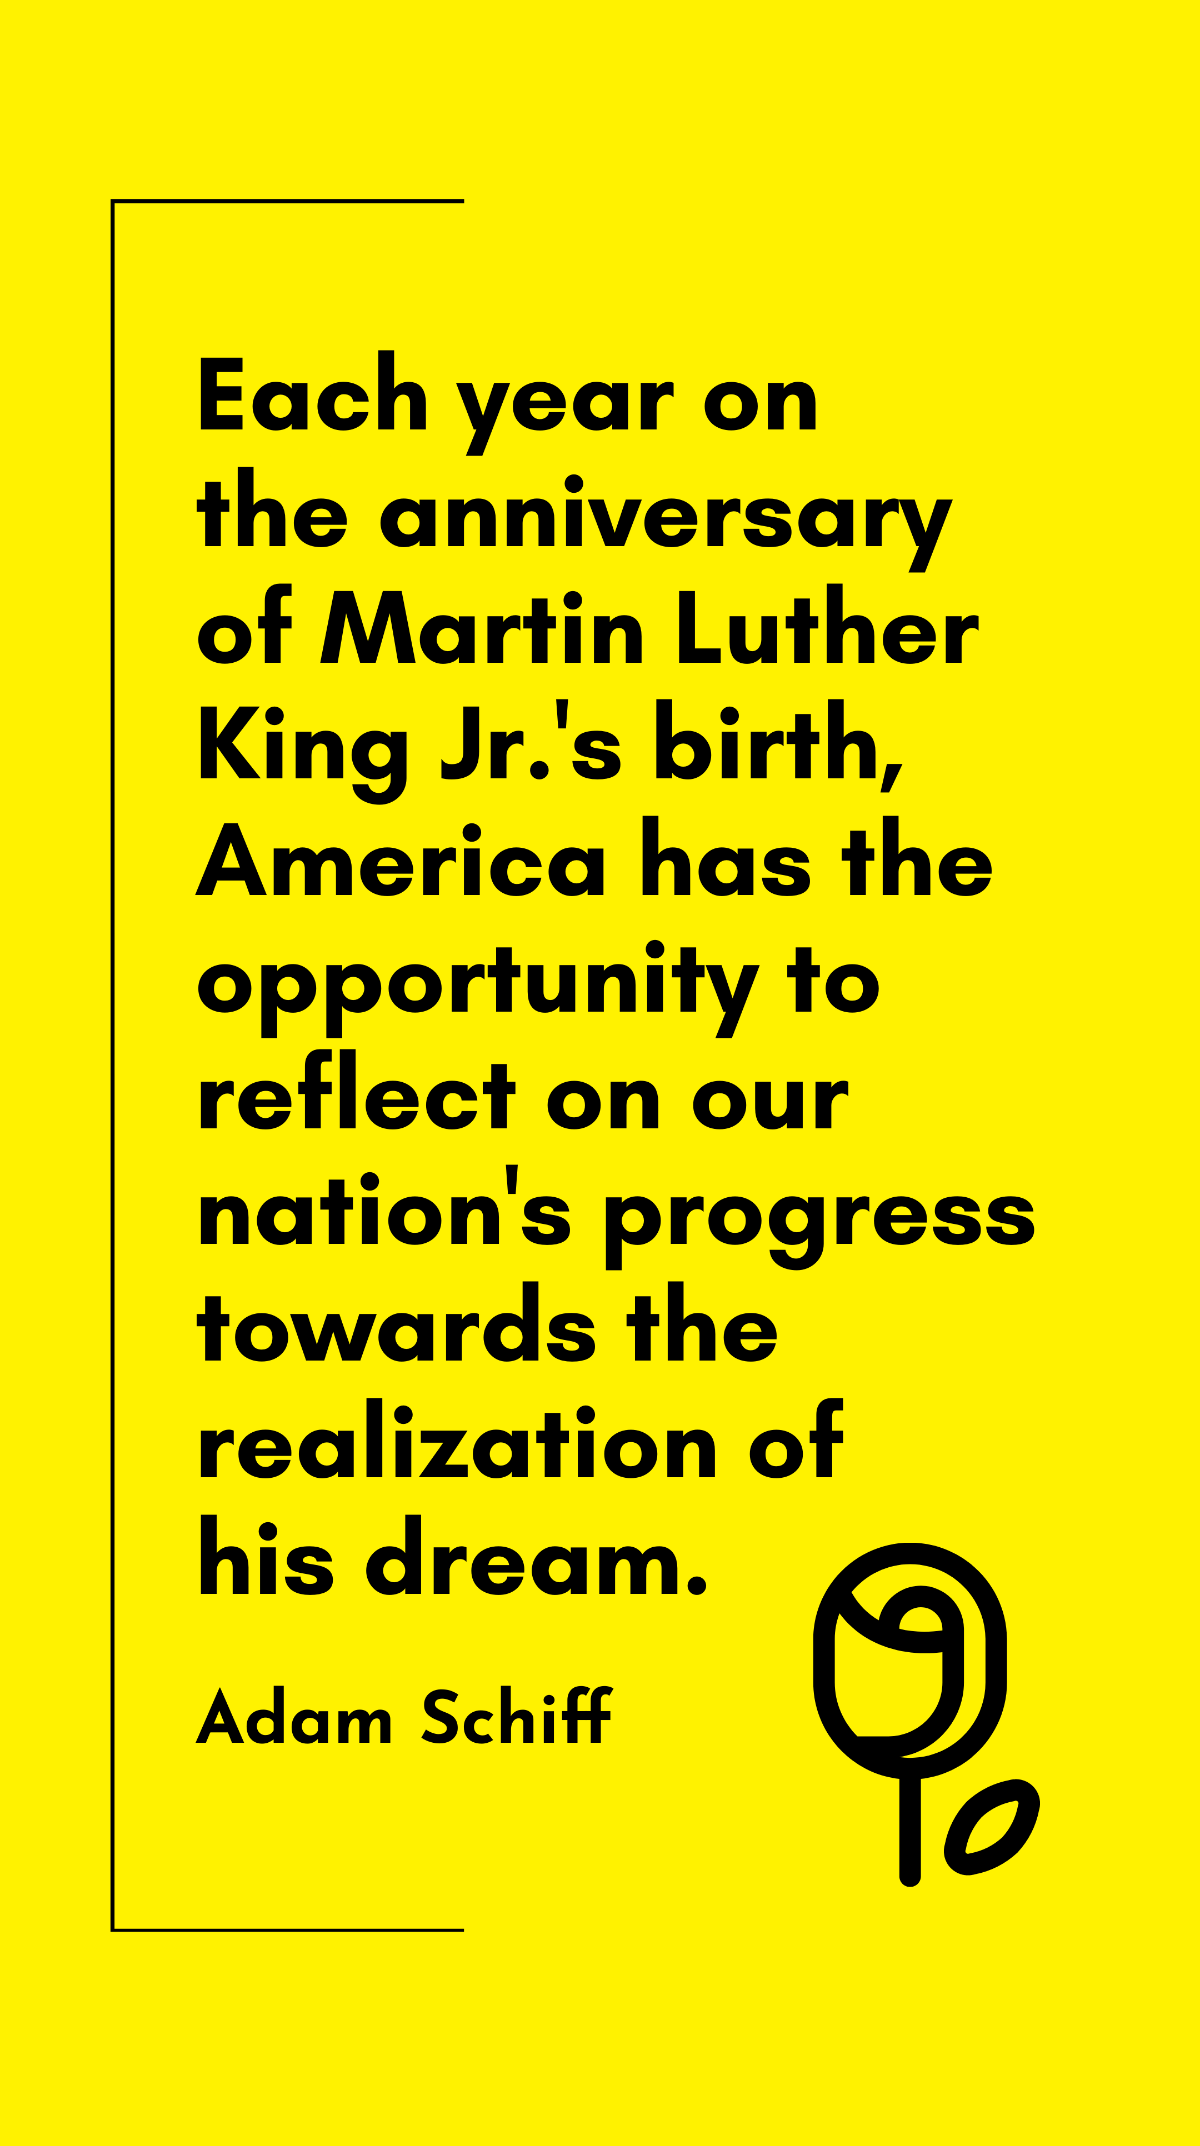 Adam Schiff - Each year on the anniversary of Martin Luther King Jr.'s birth, America has the opportunity to reflect on our nation's progress towards the realization of his dream. Template